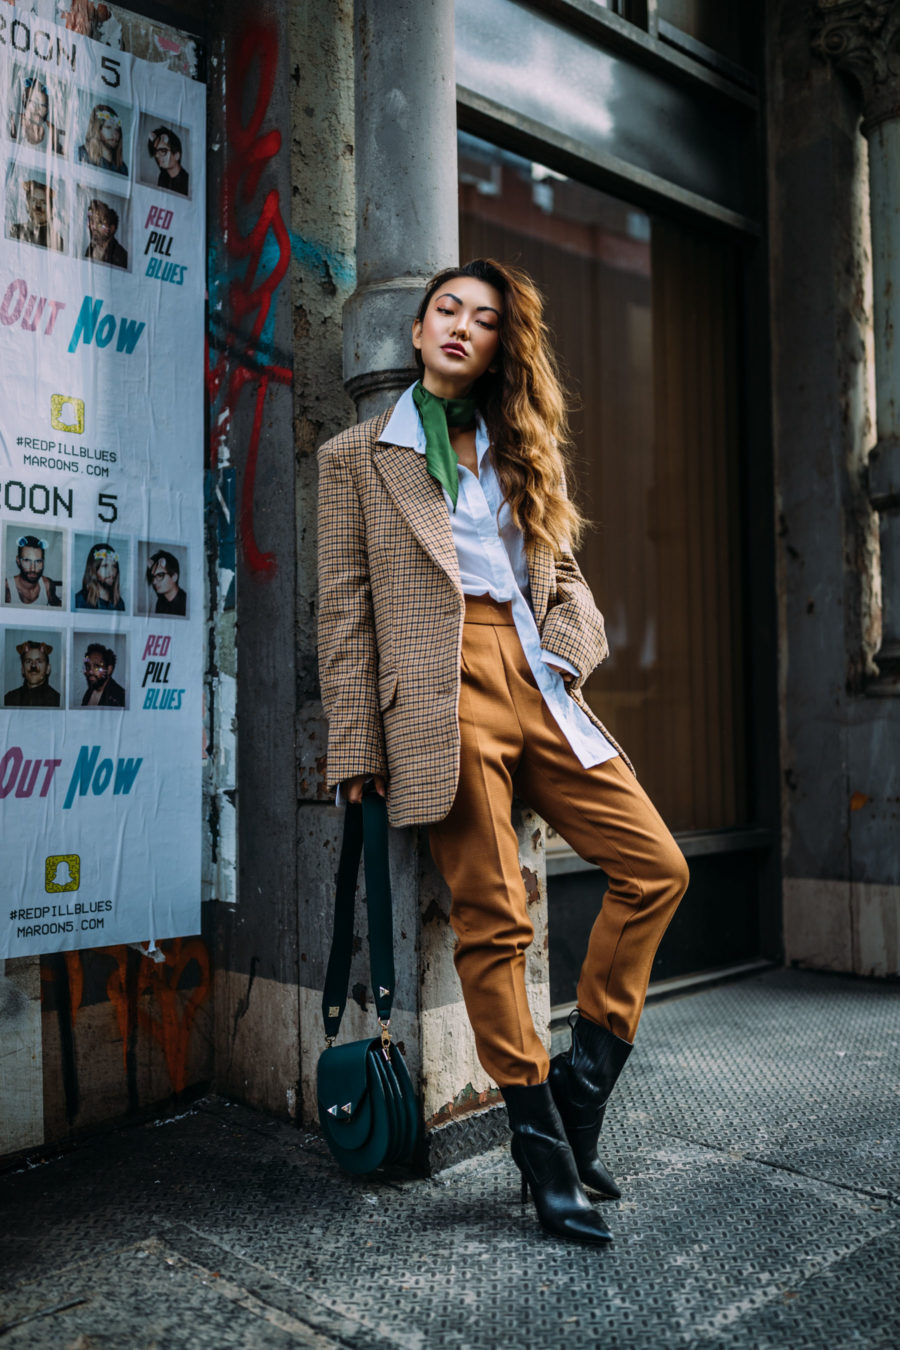 cozy meets chic - the most comfortable on-trend fall outfits, cozy chic outfits - oversized blazer, plaid blazer, menswear inspired fashion, green accessories, oversized tailoring, oversized button up// Jessica Wang - Notjessfashion.com